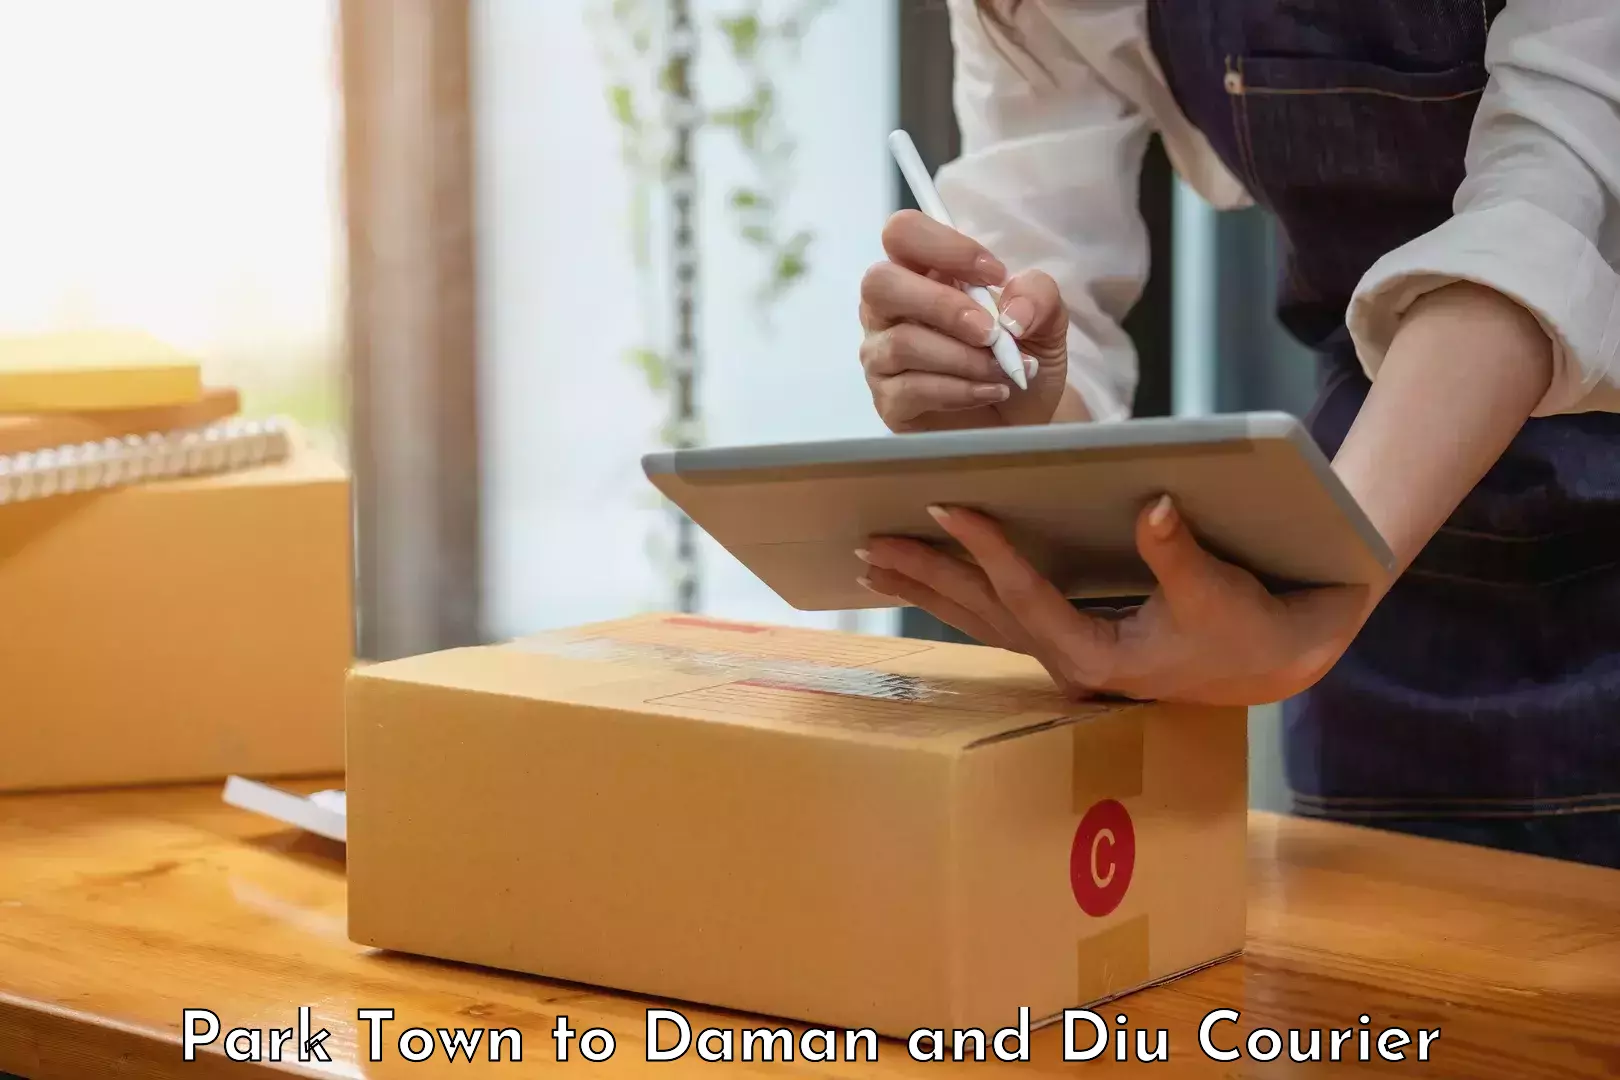 On-demand delivery in Park Town to Daman and Diu